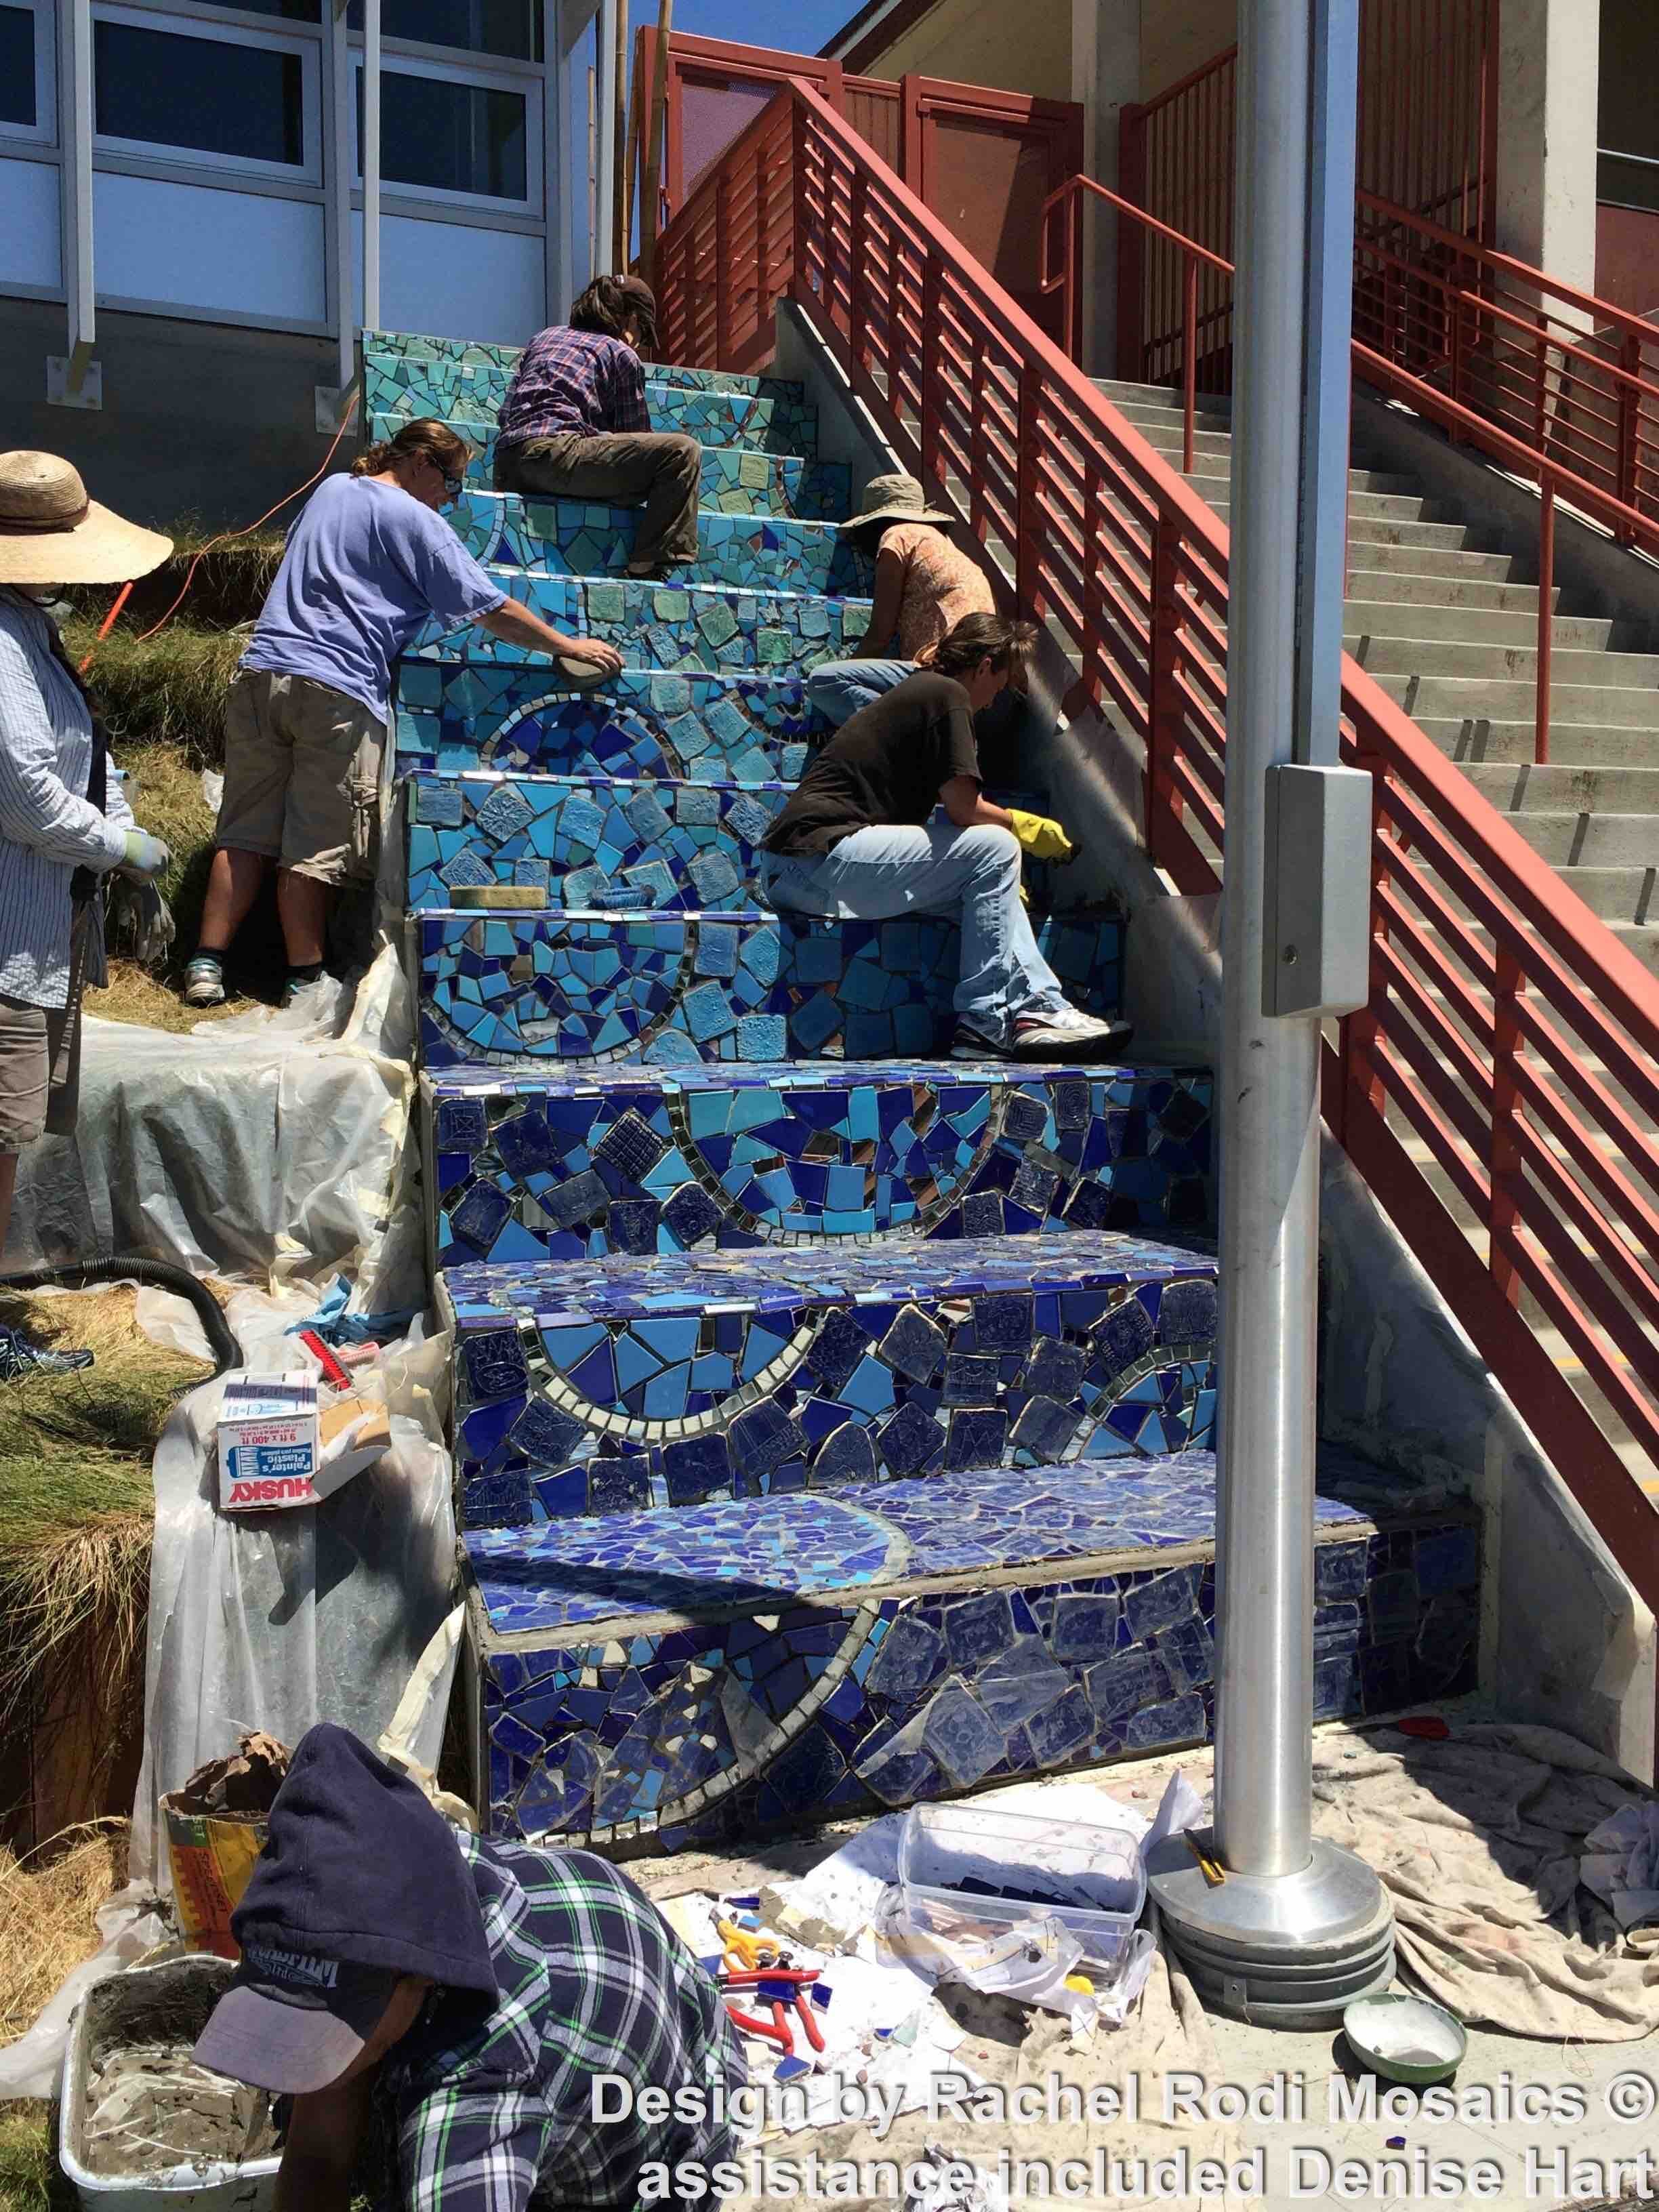 Installing the mosaic with community members